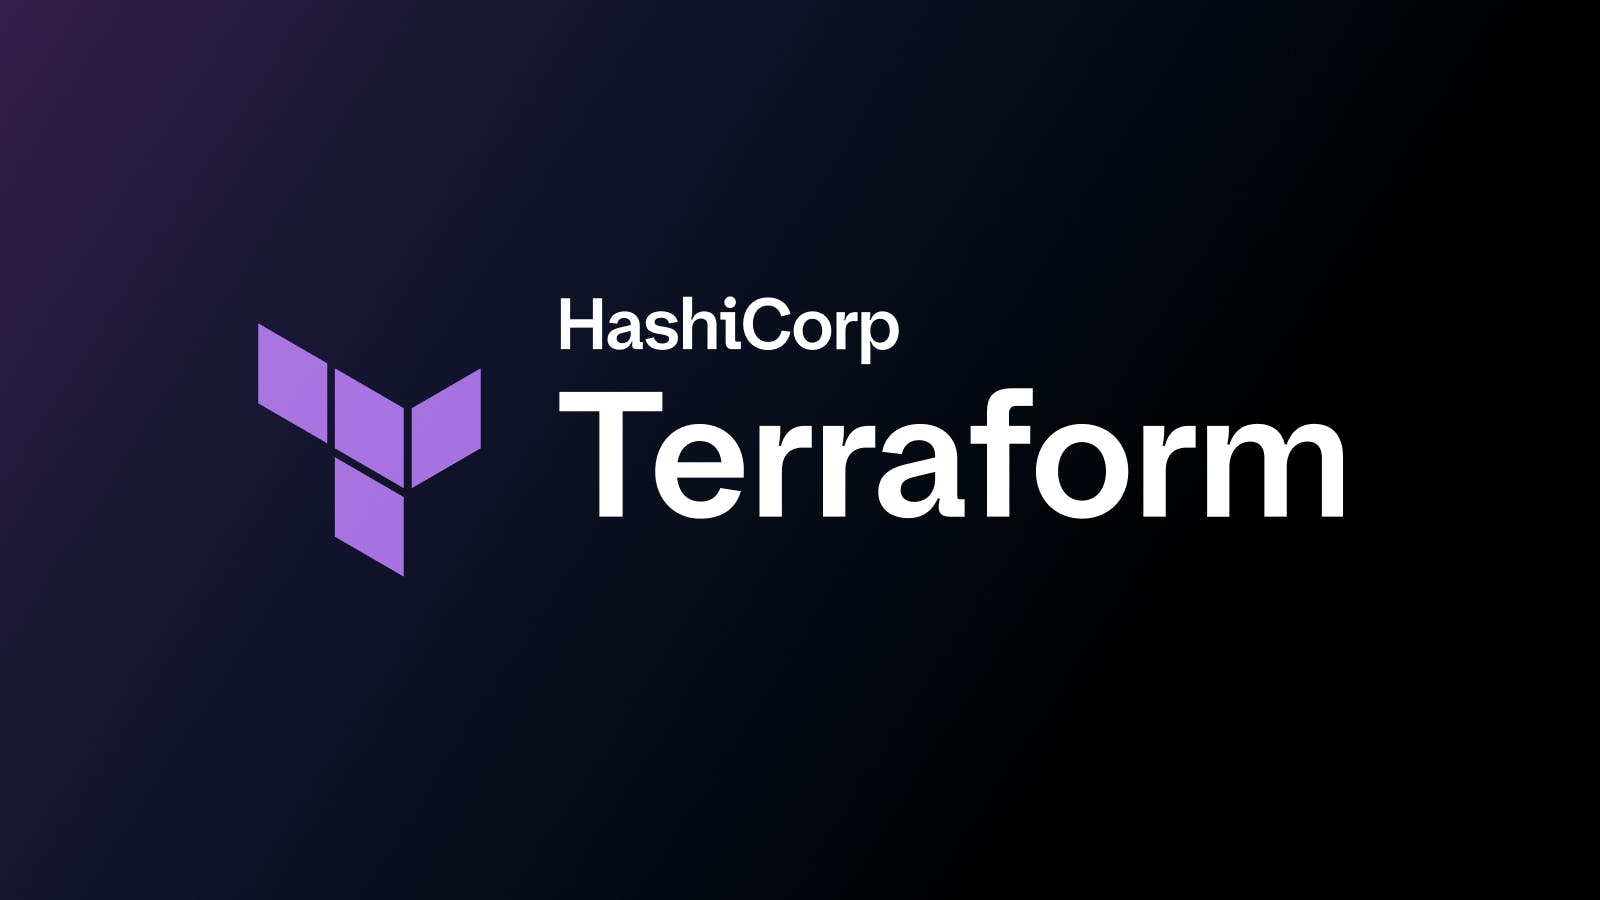 New Terraform integrations from Dell, Fortinet, GitHub, Harness, Snyk, Splunk, and Zscaler